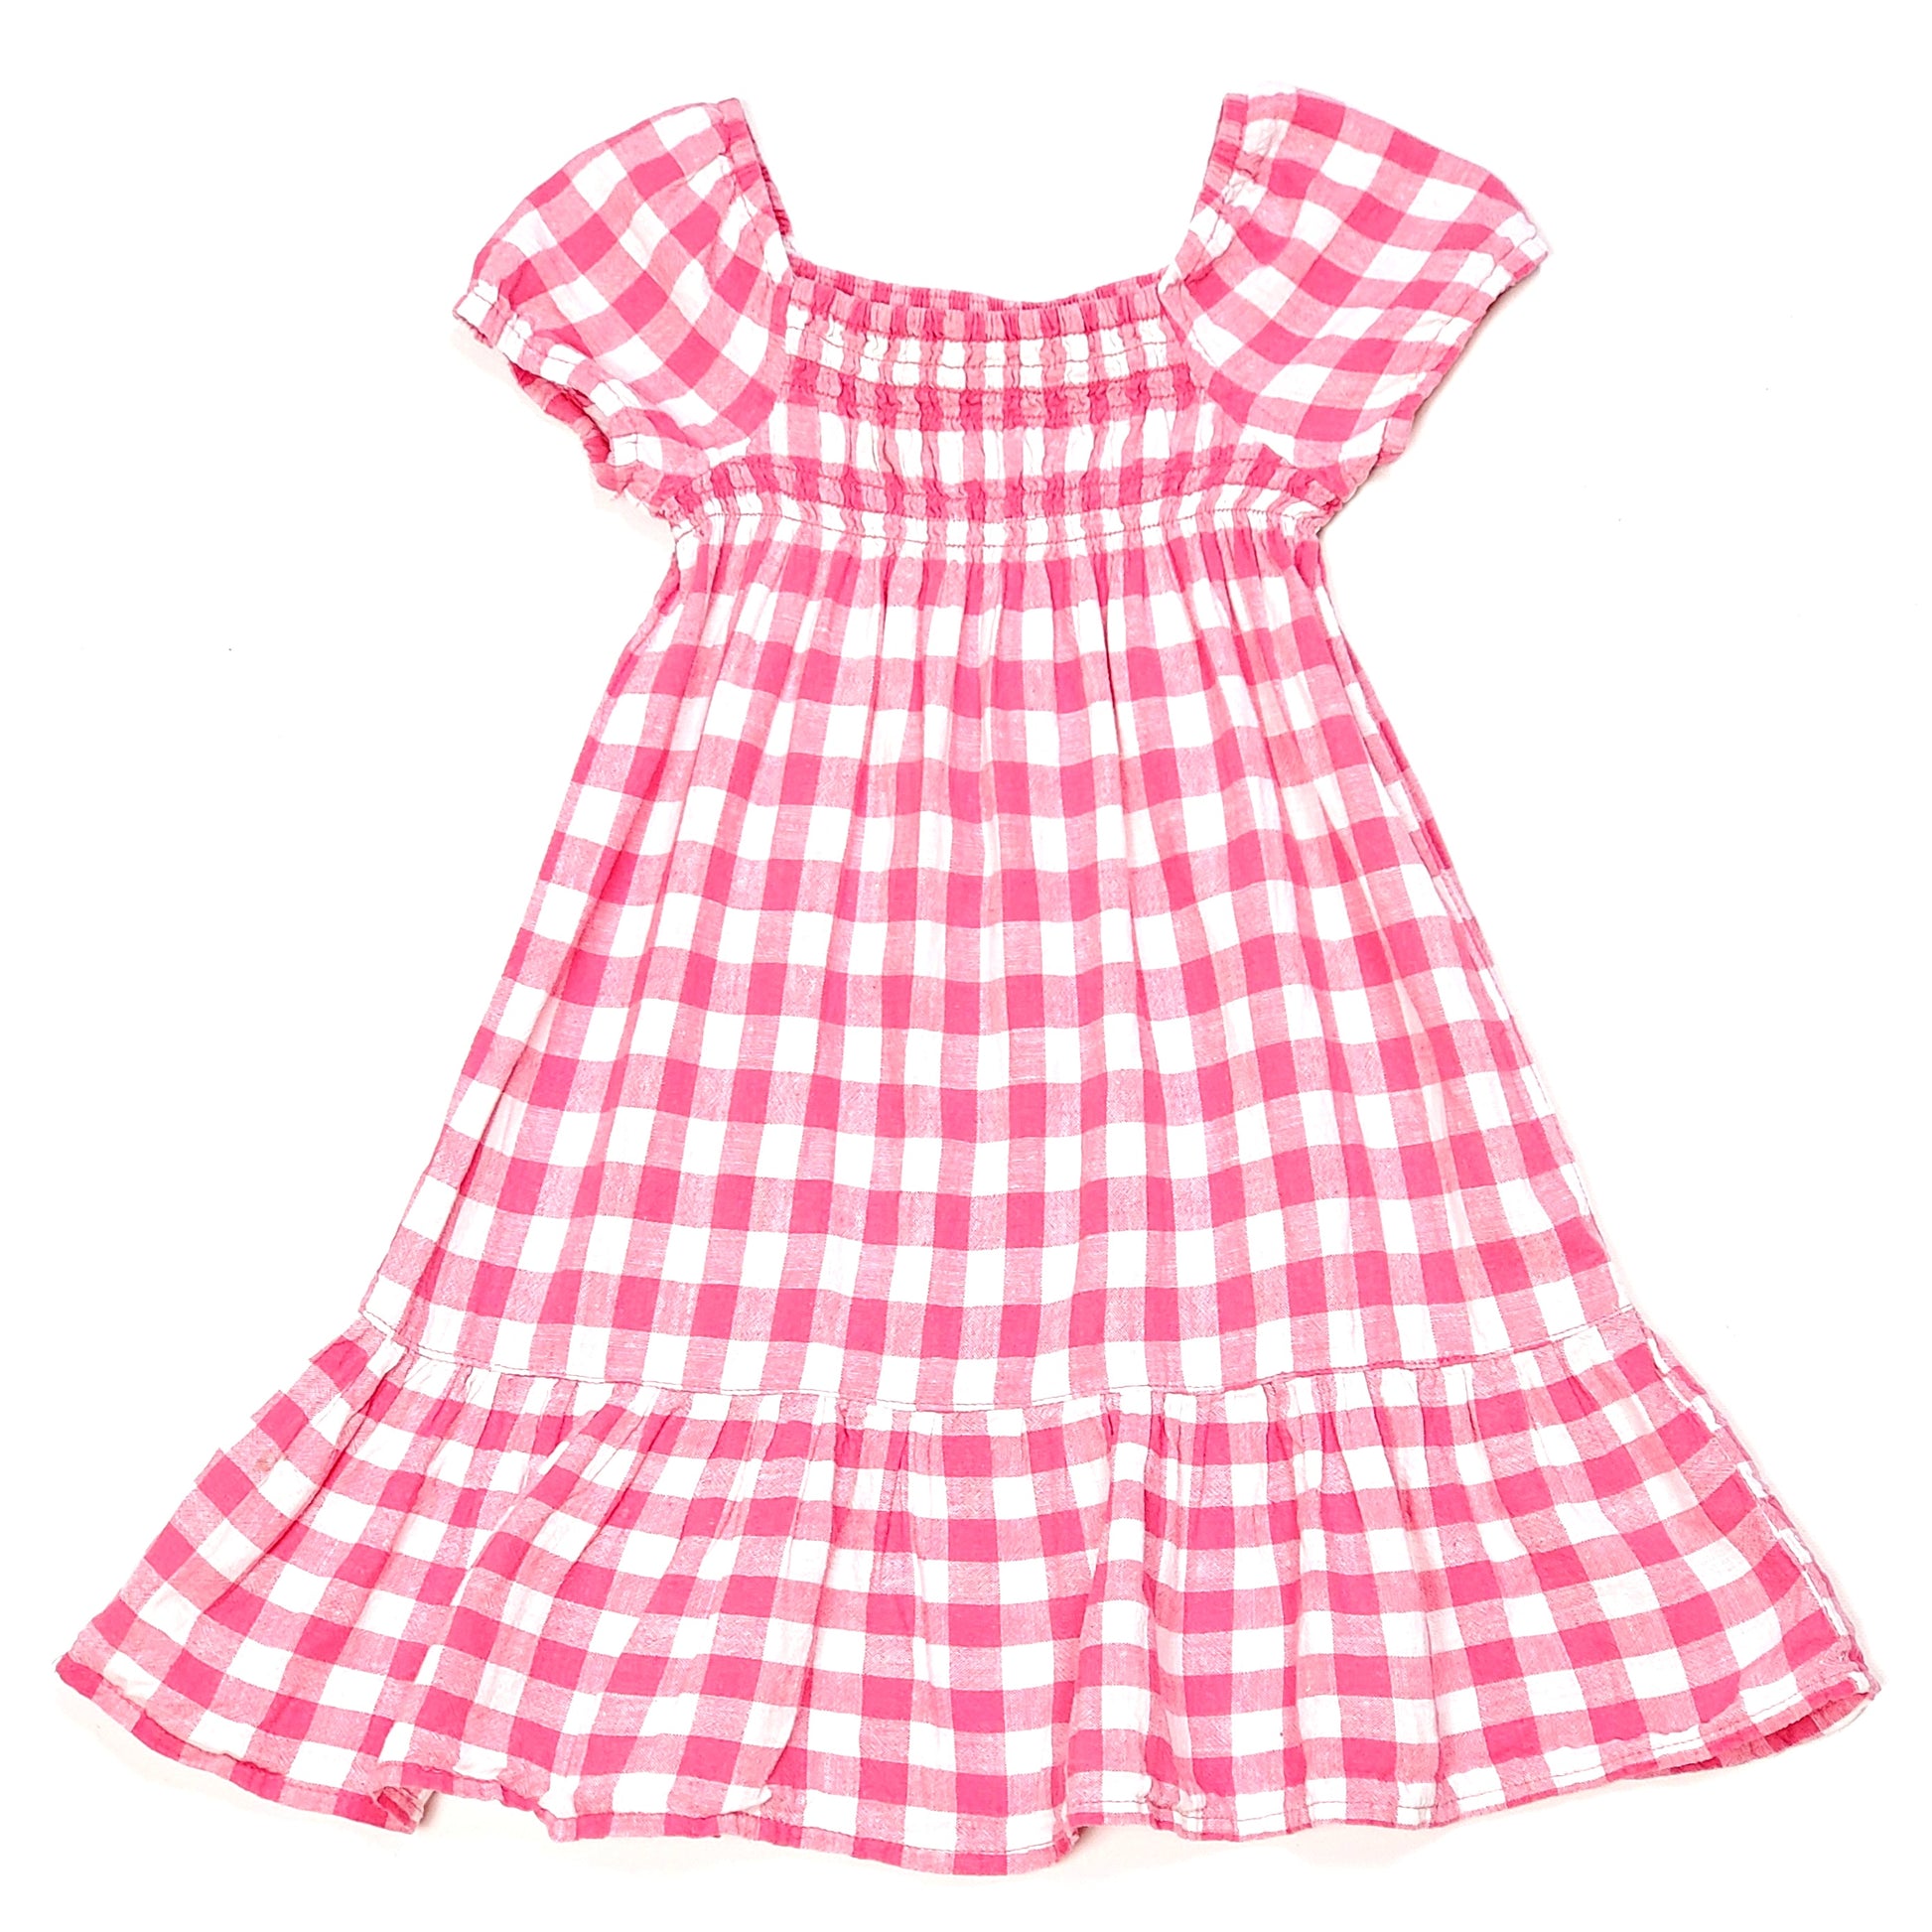 Old Navy Pink Gingham Plaid Girls Dress 2T Used View 1